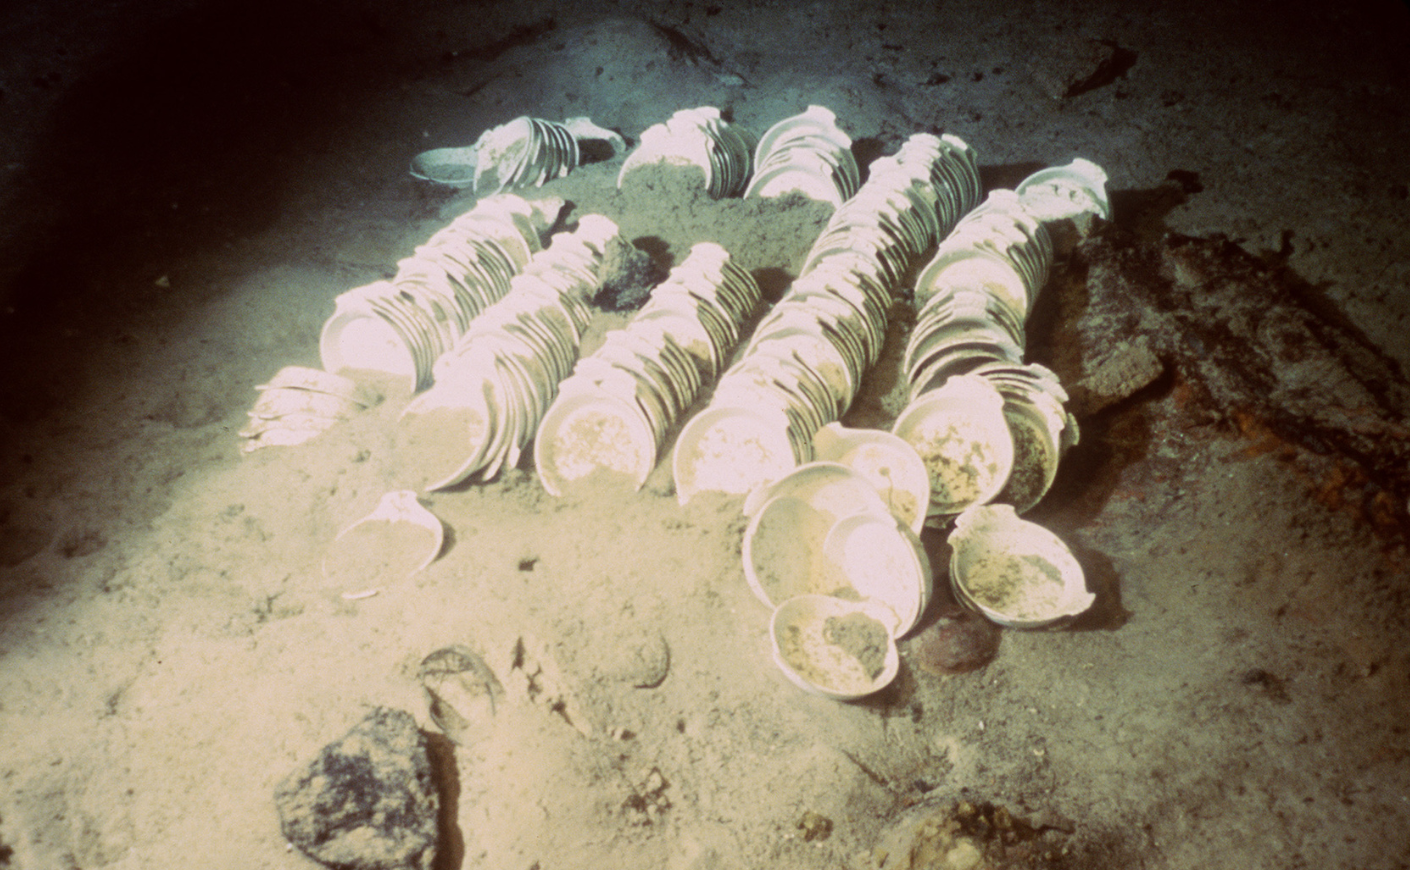 Sets of unbroken breakfast dishes were found on the ocean floor near the wreck site of Titanic. (Getty Images)